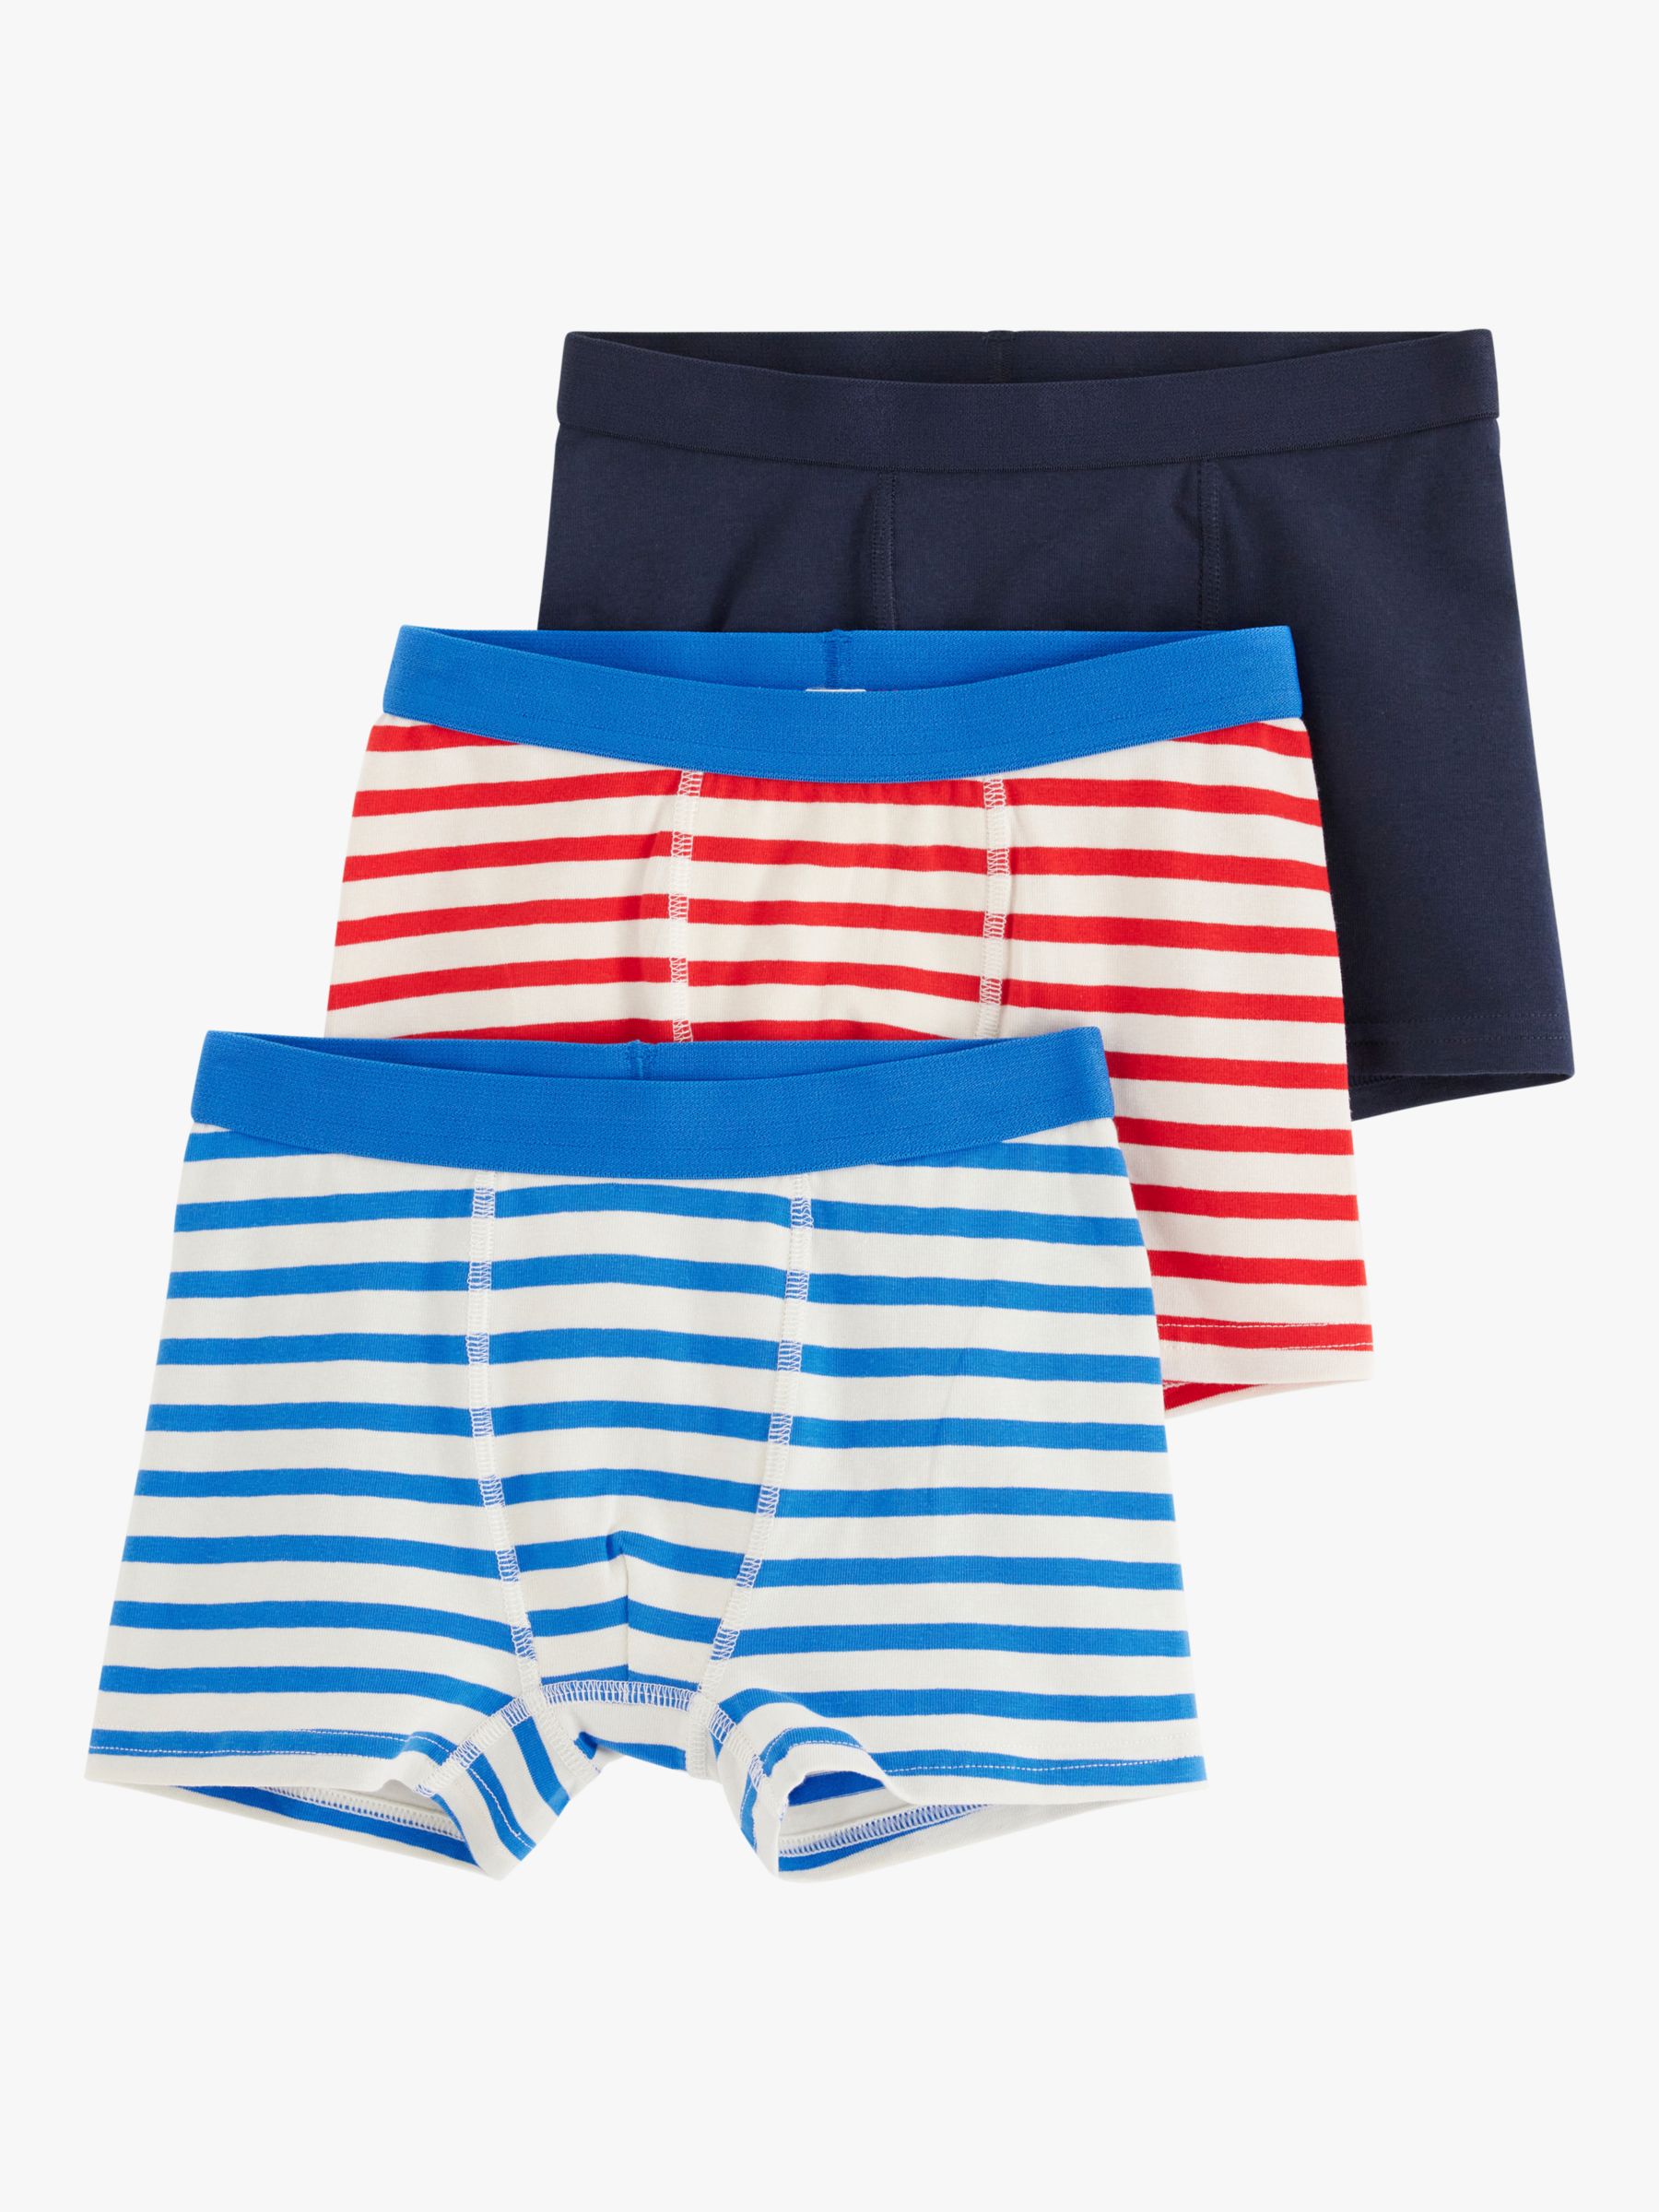 Lindex Kids' Striped Boxers, Pack of 3, Red/Blue/White, 6-8 years